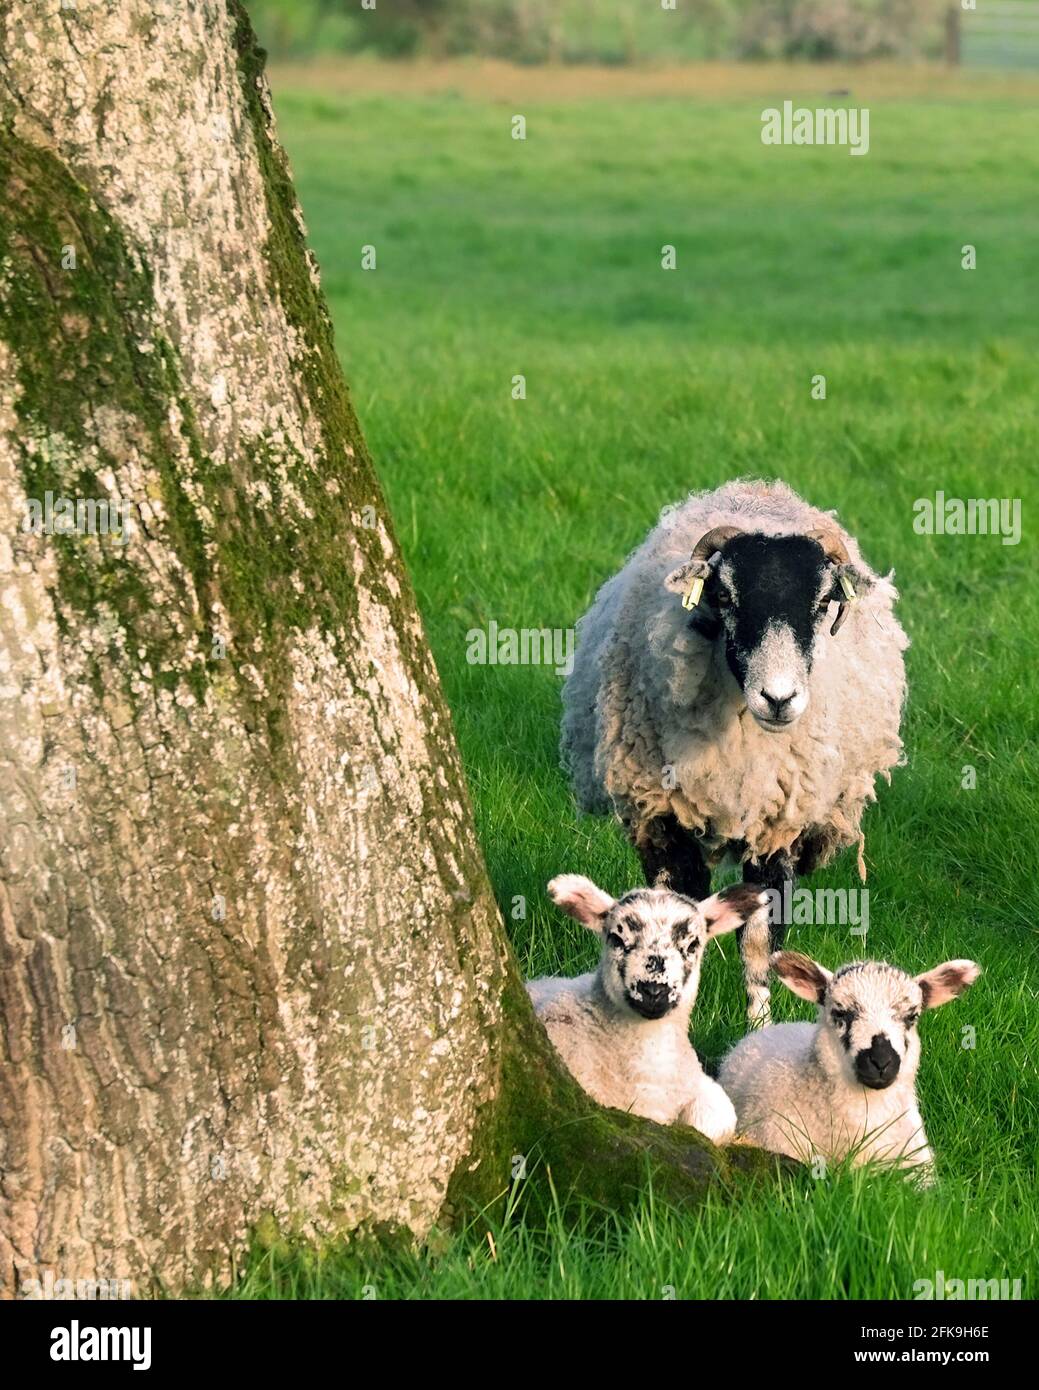 April 2021 - Sheep and young on pasture in rural Somerset, England, UK Stock Photo